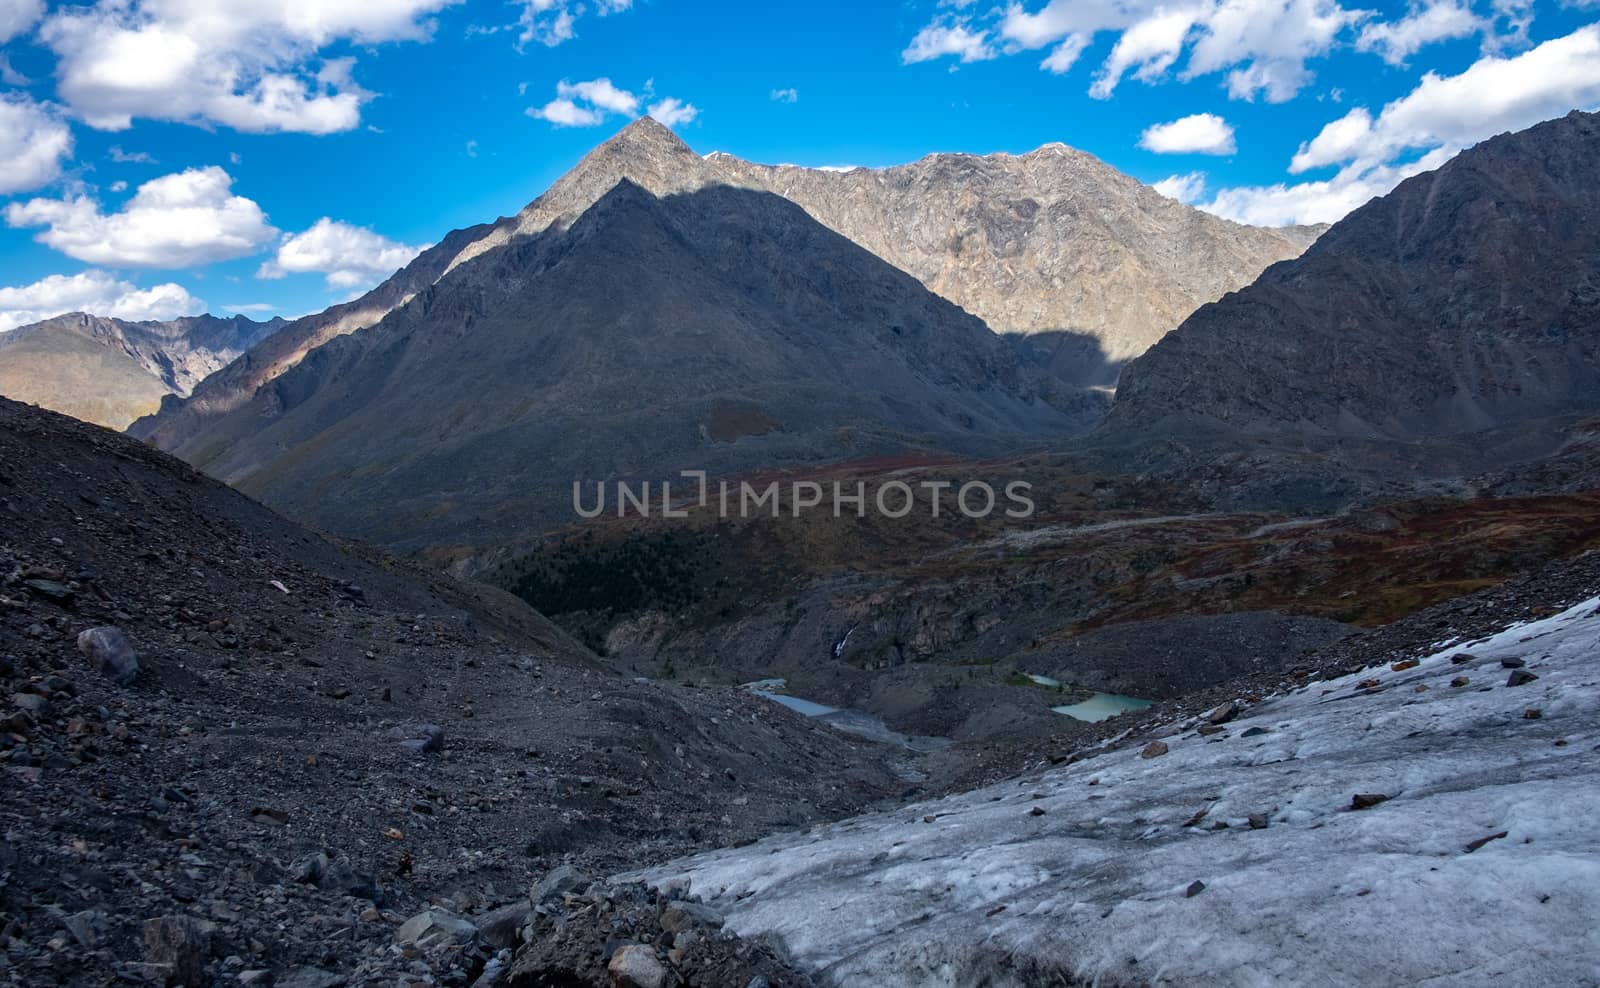 Glacier on the background of mountain peaks in the Altai Republic.